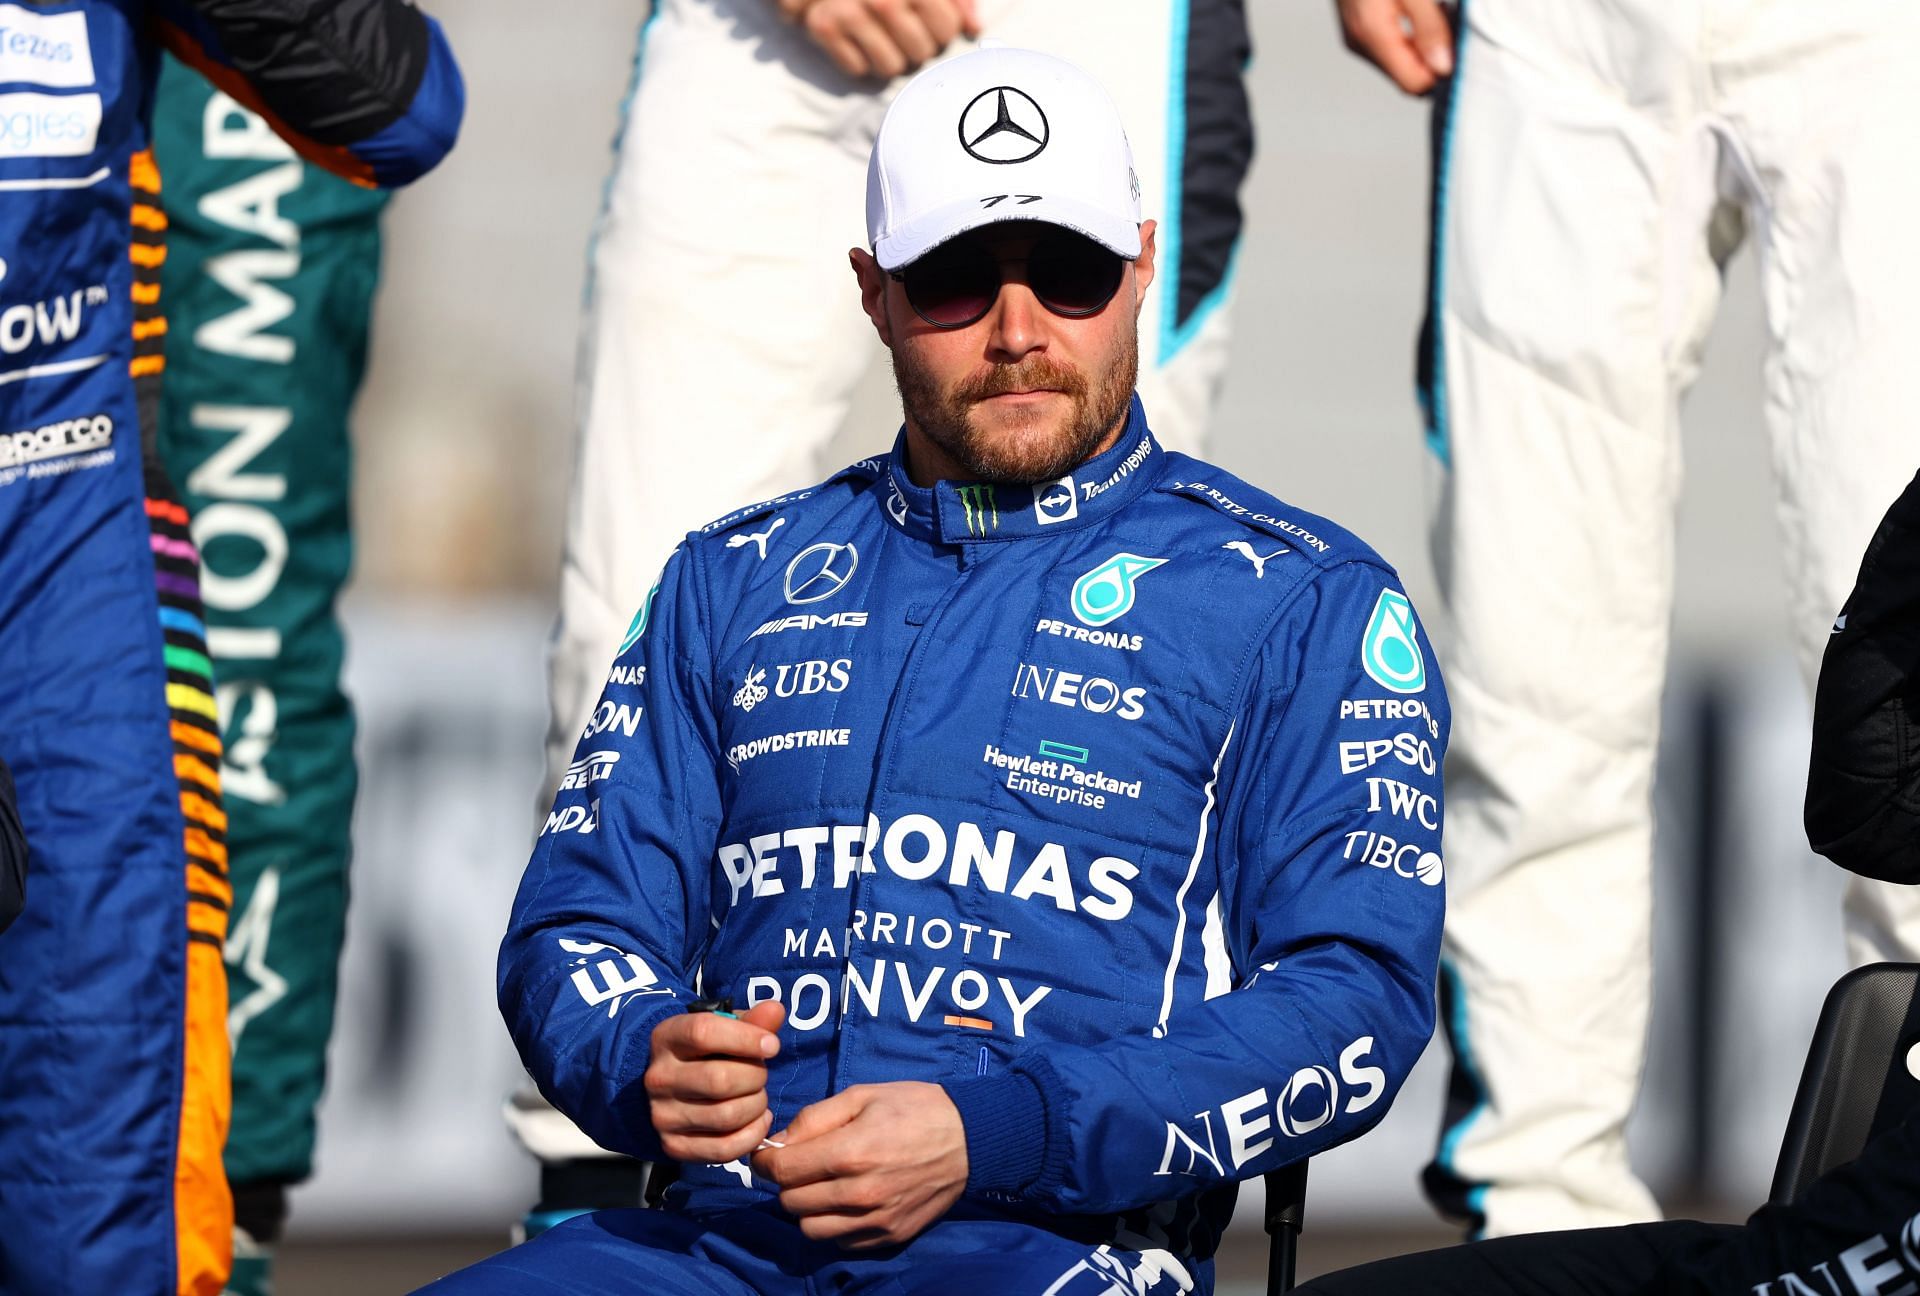 Valtteri Bottas had a rather disappointing last season with Mercedes